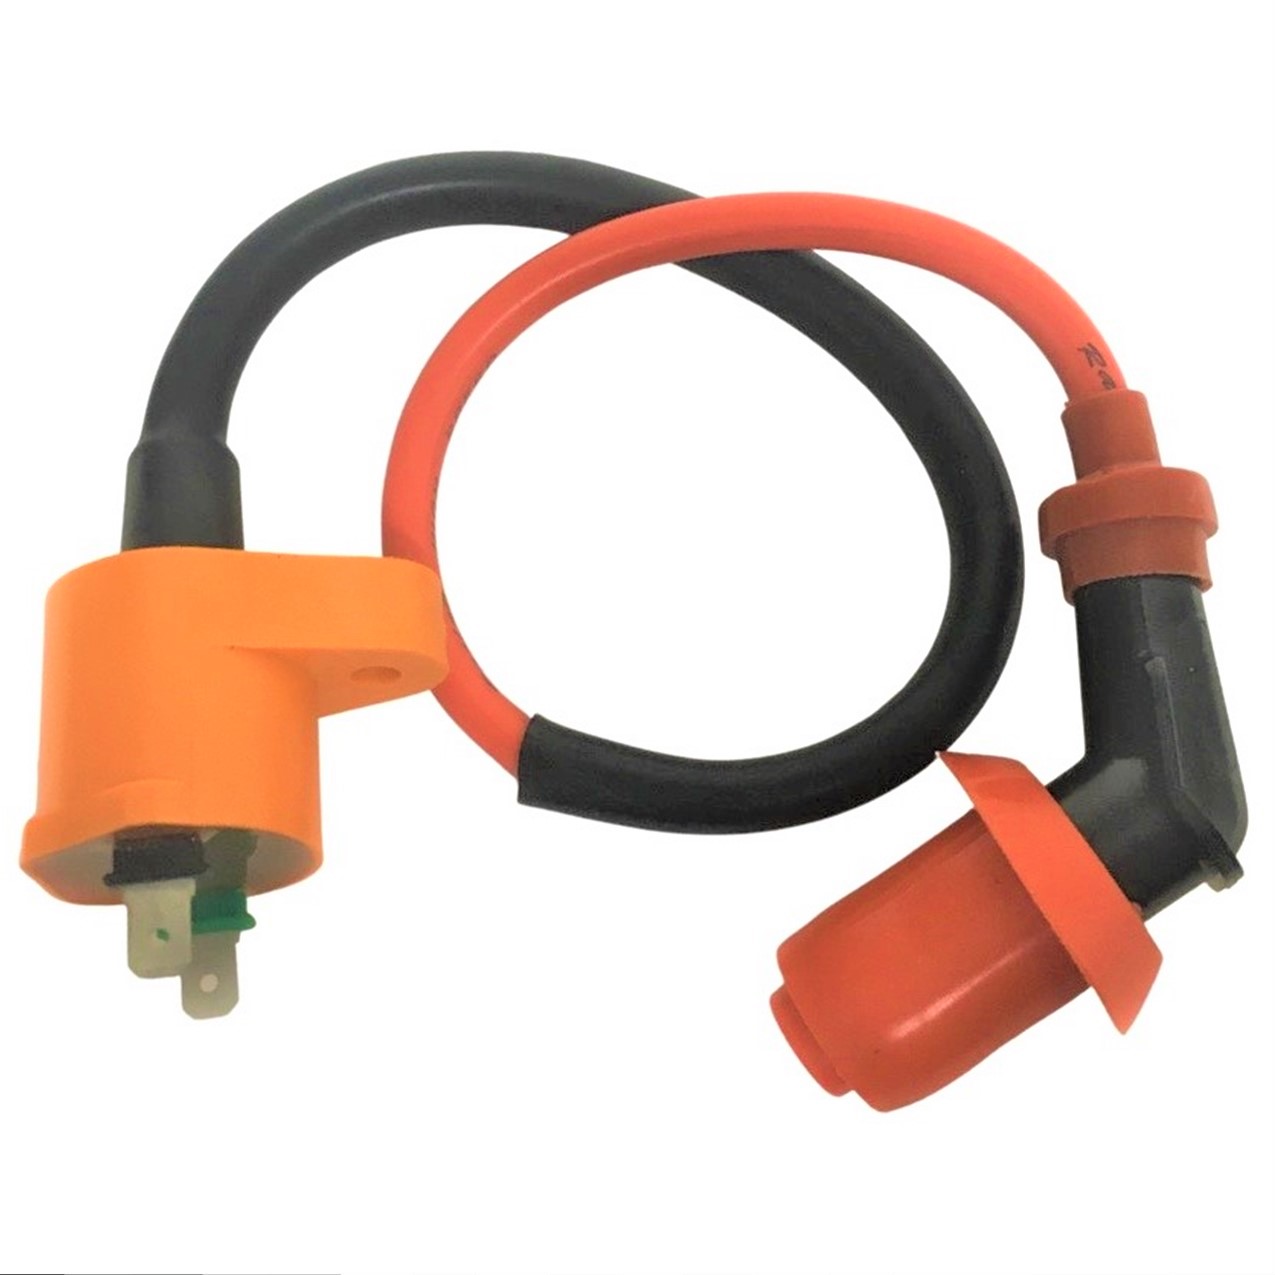 HIGH PERFORMANCE Ignition Coil Wire=15" Fits Most ATVs, GoKarts, Scooters With GY6-50,125,150,180cc Motors - Click Image to Close